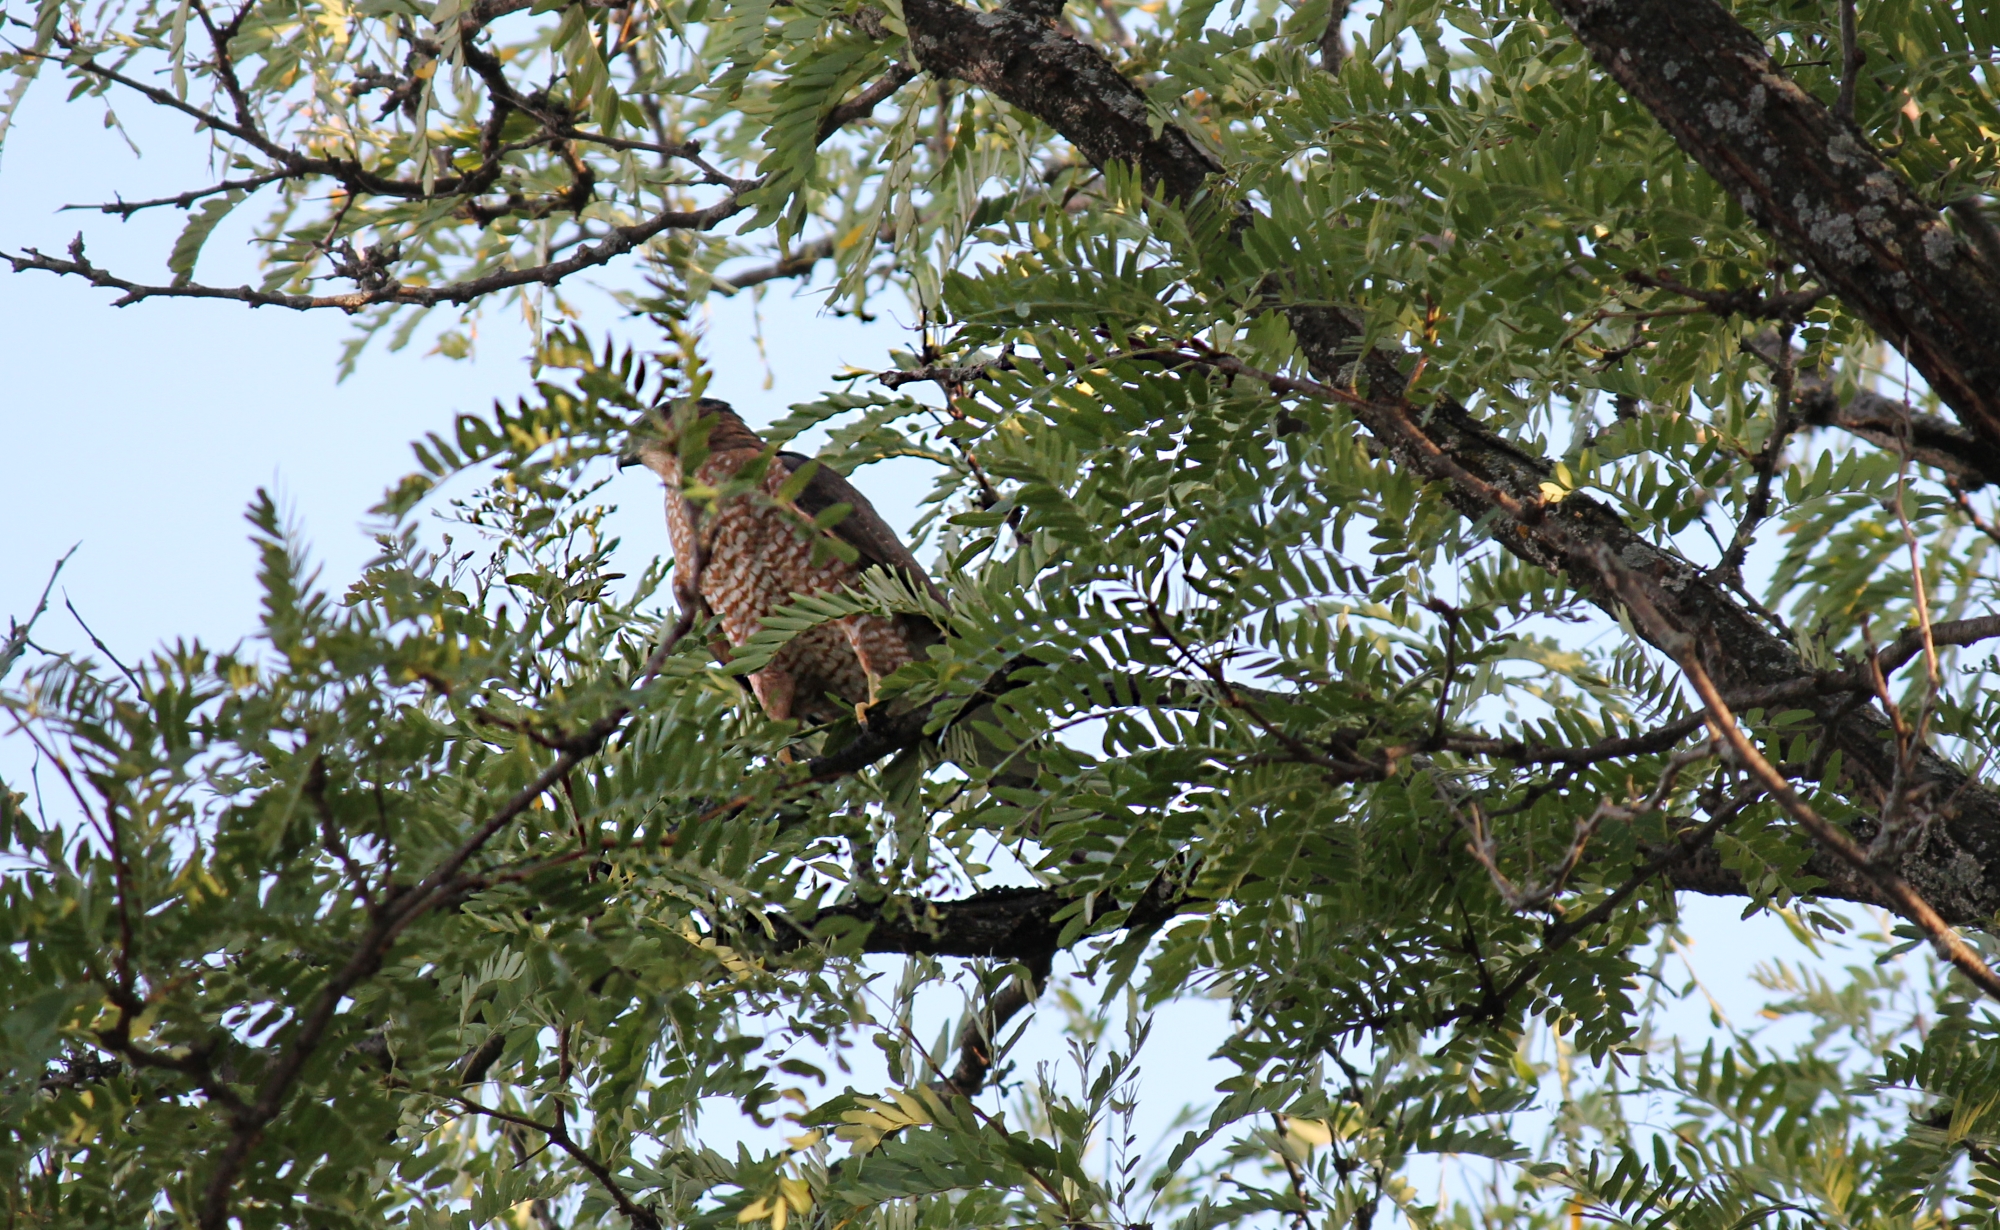 Hawk perched on a tree branch of a locust tree